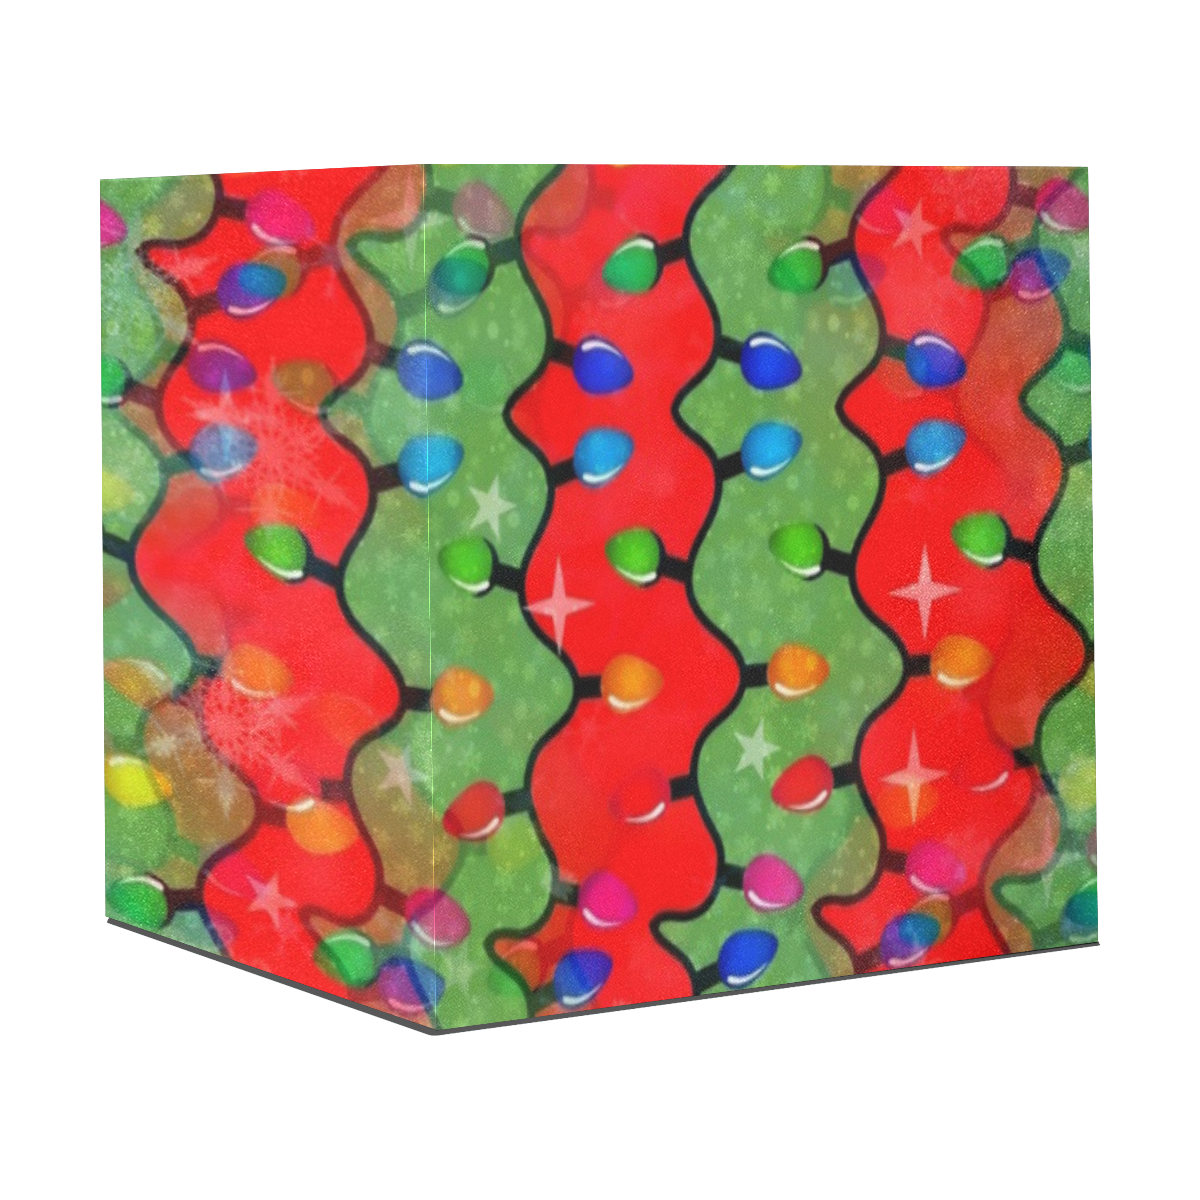 Christmas Lights 2 by Nico Bielow Gift Wrapping Paper 58"x 23" (3 Rolls)